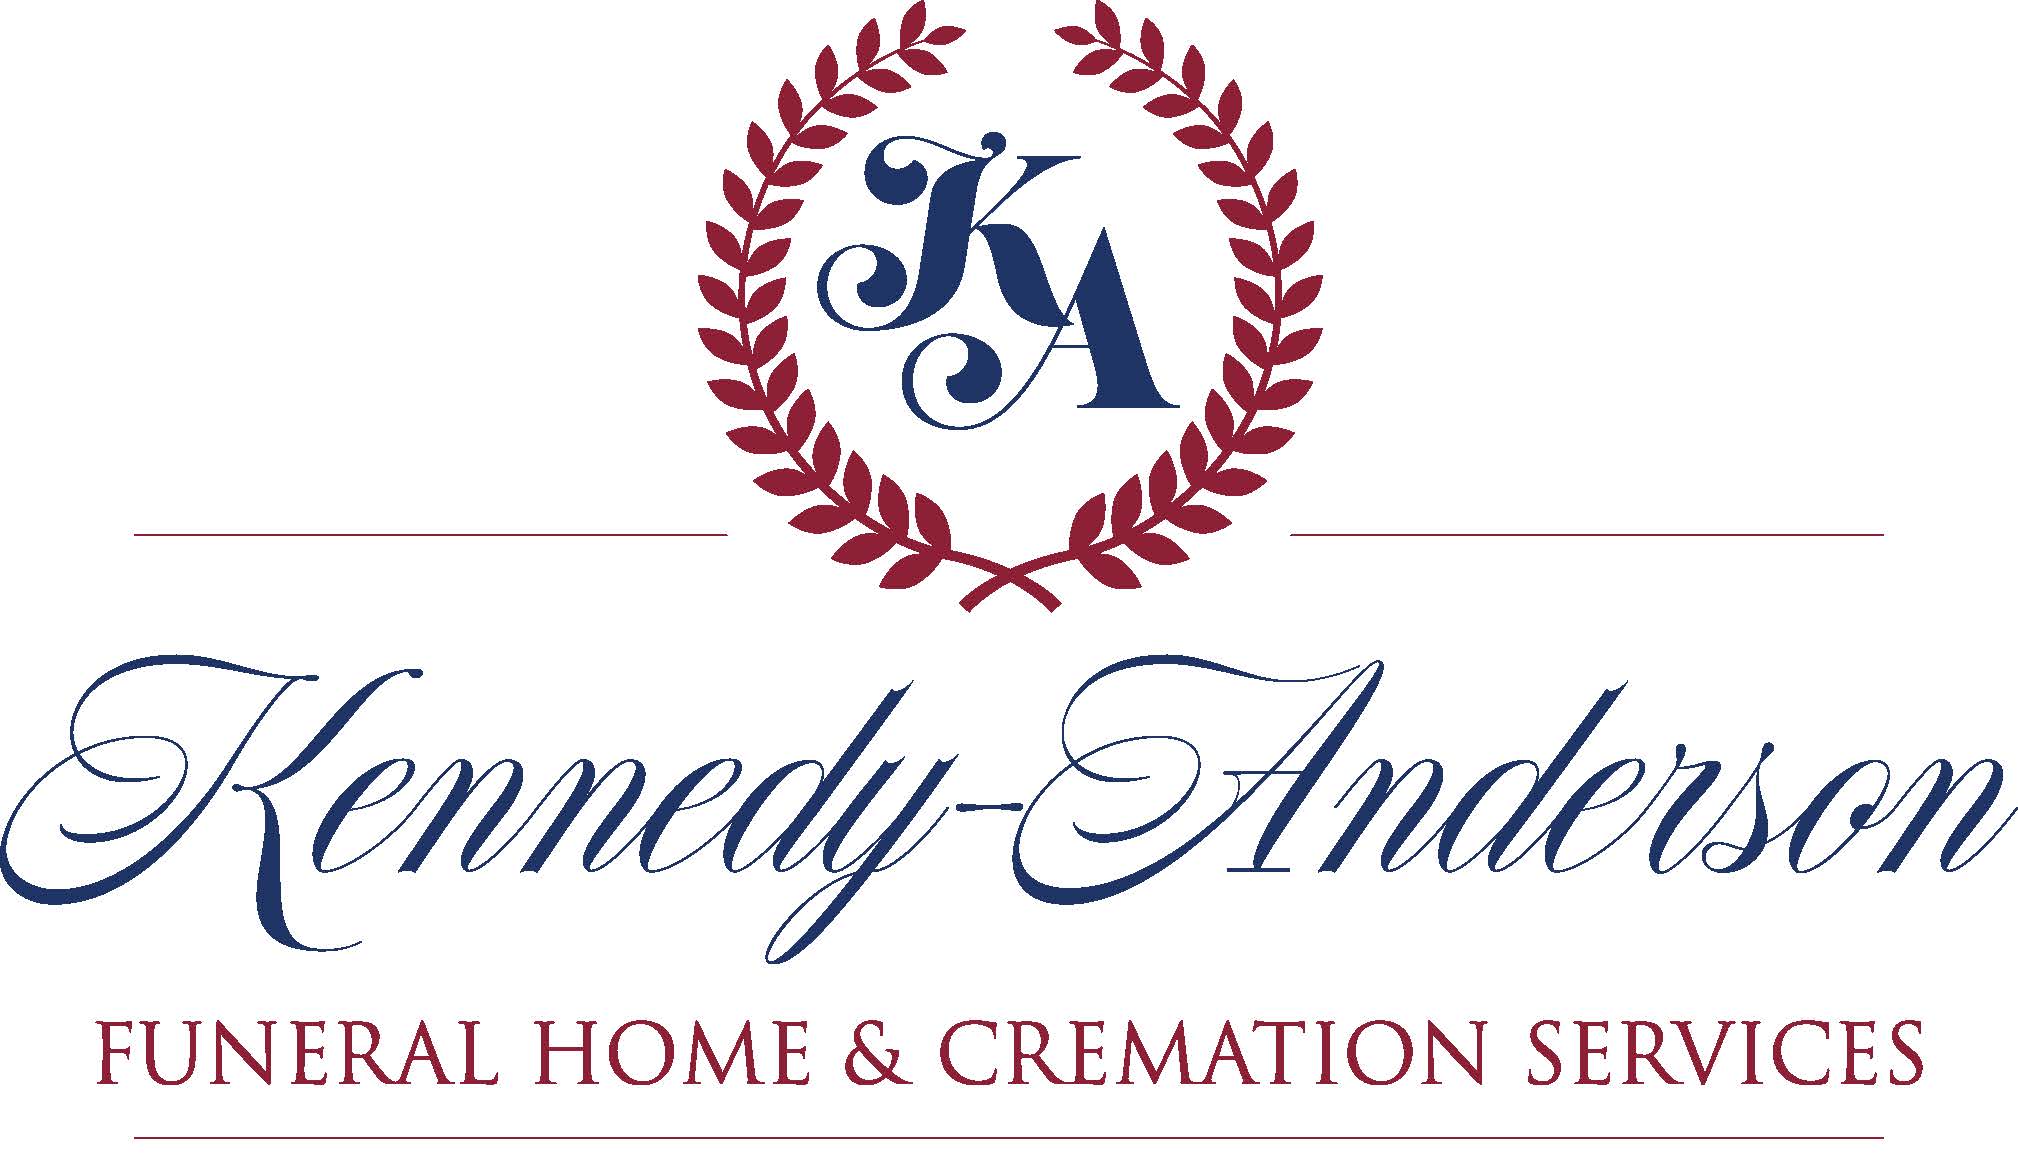 KennedyAnderson Funeral Home & Cremation Services 233